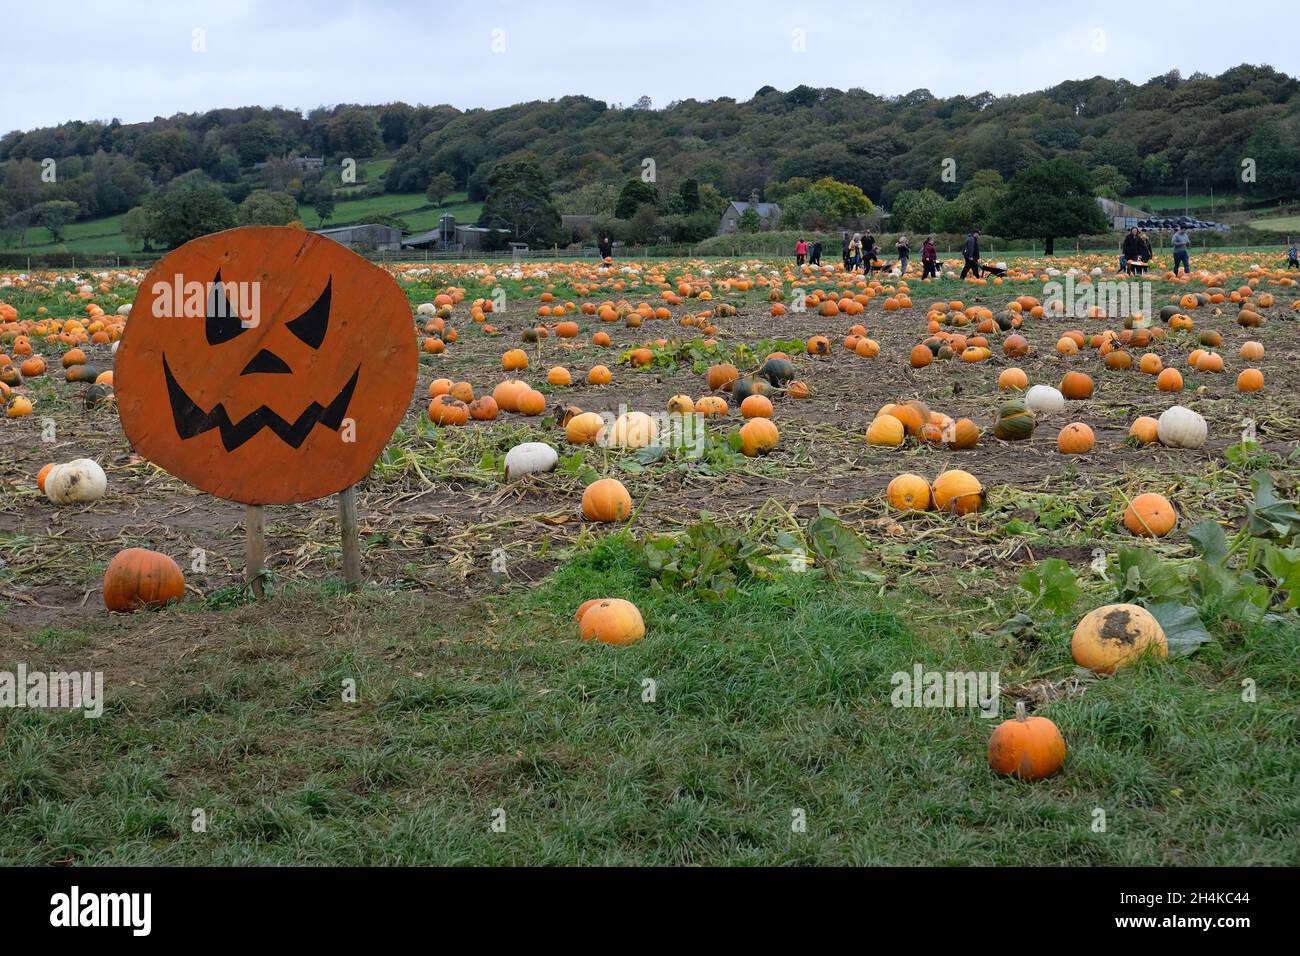 Pumpkin sign in a field of pumpkins waiting to be picked for Halloween at Ashover Pumpkins a pick your own pumpkin farm at Ashover, Derbyshire, UK Stock Photo